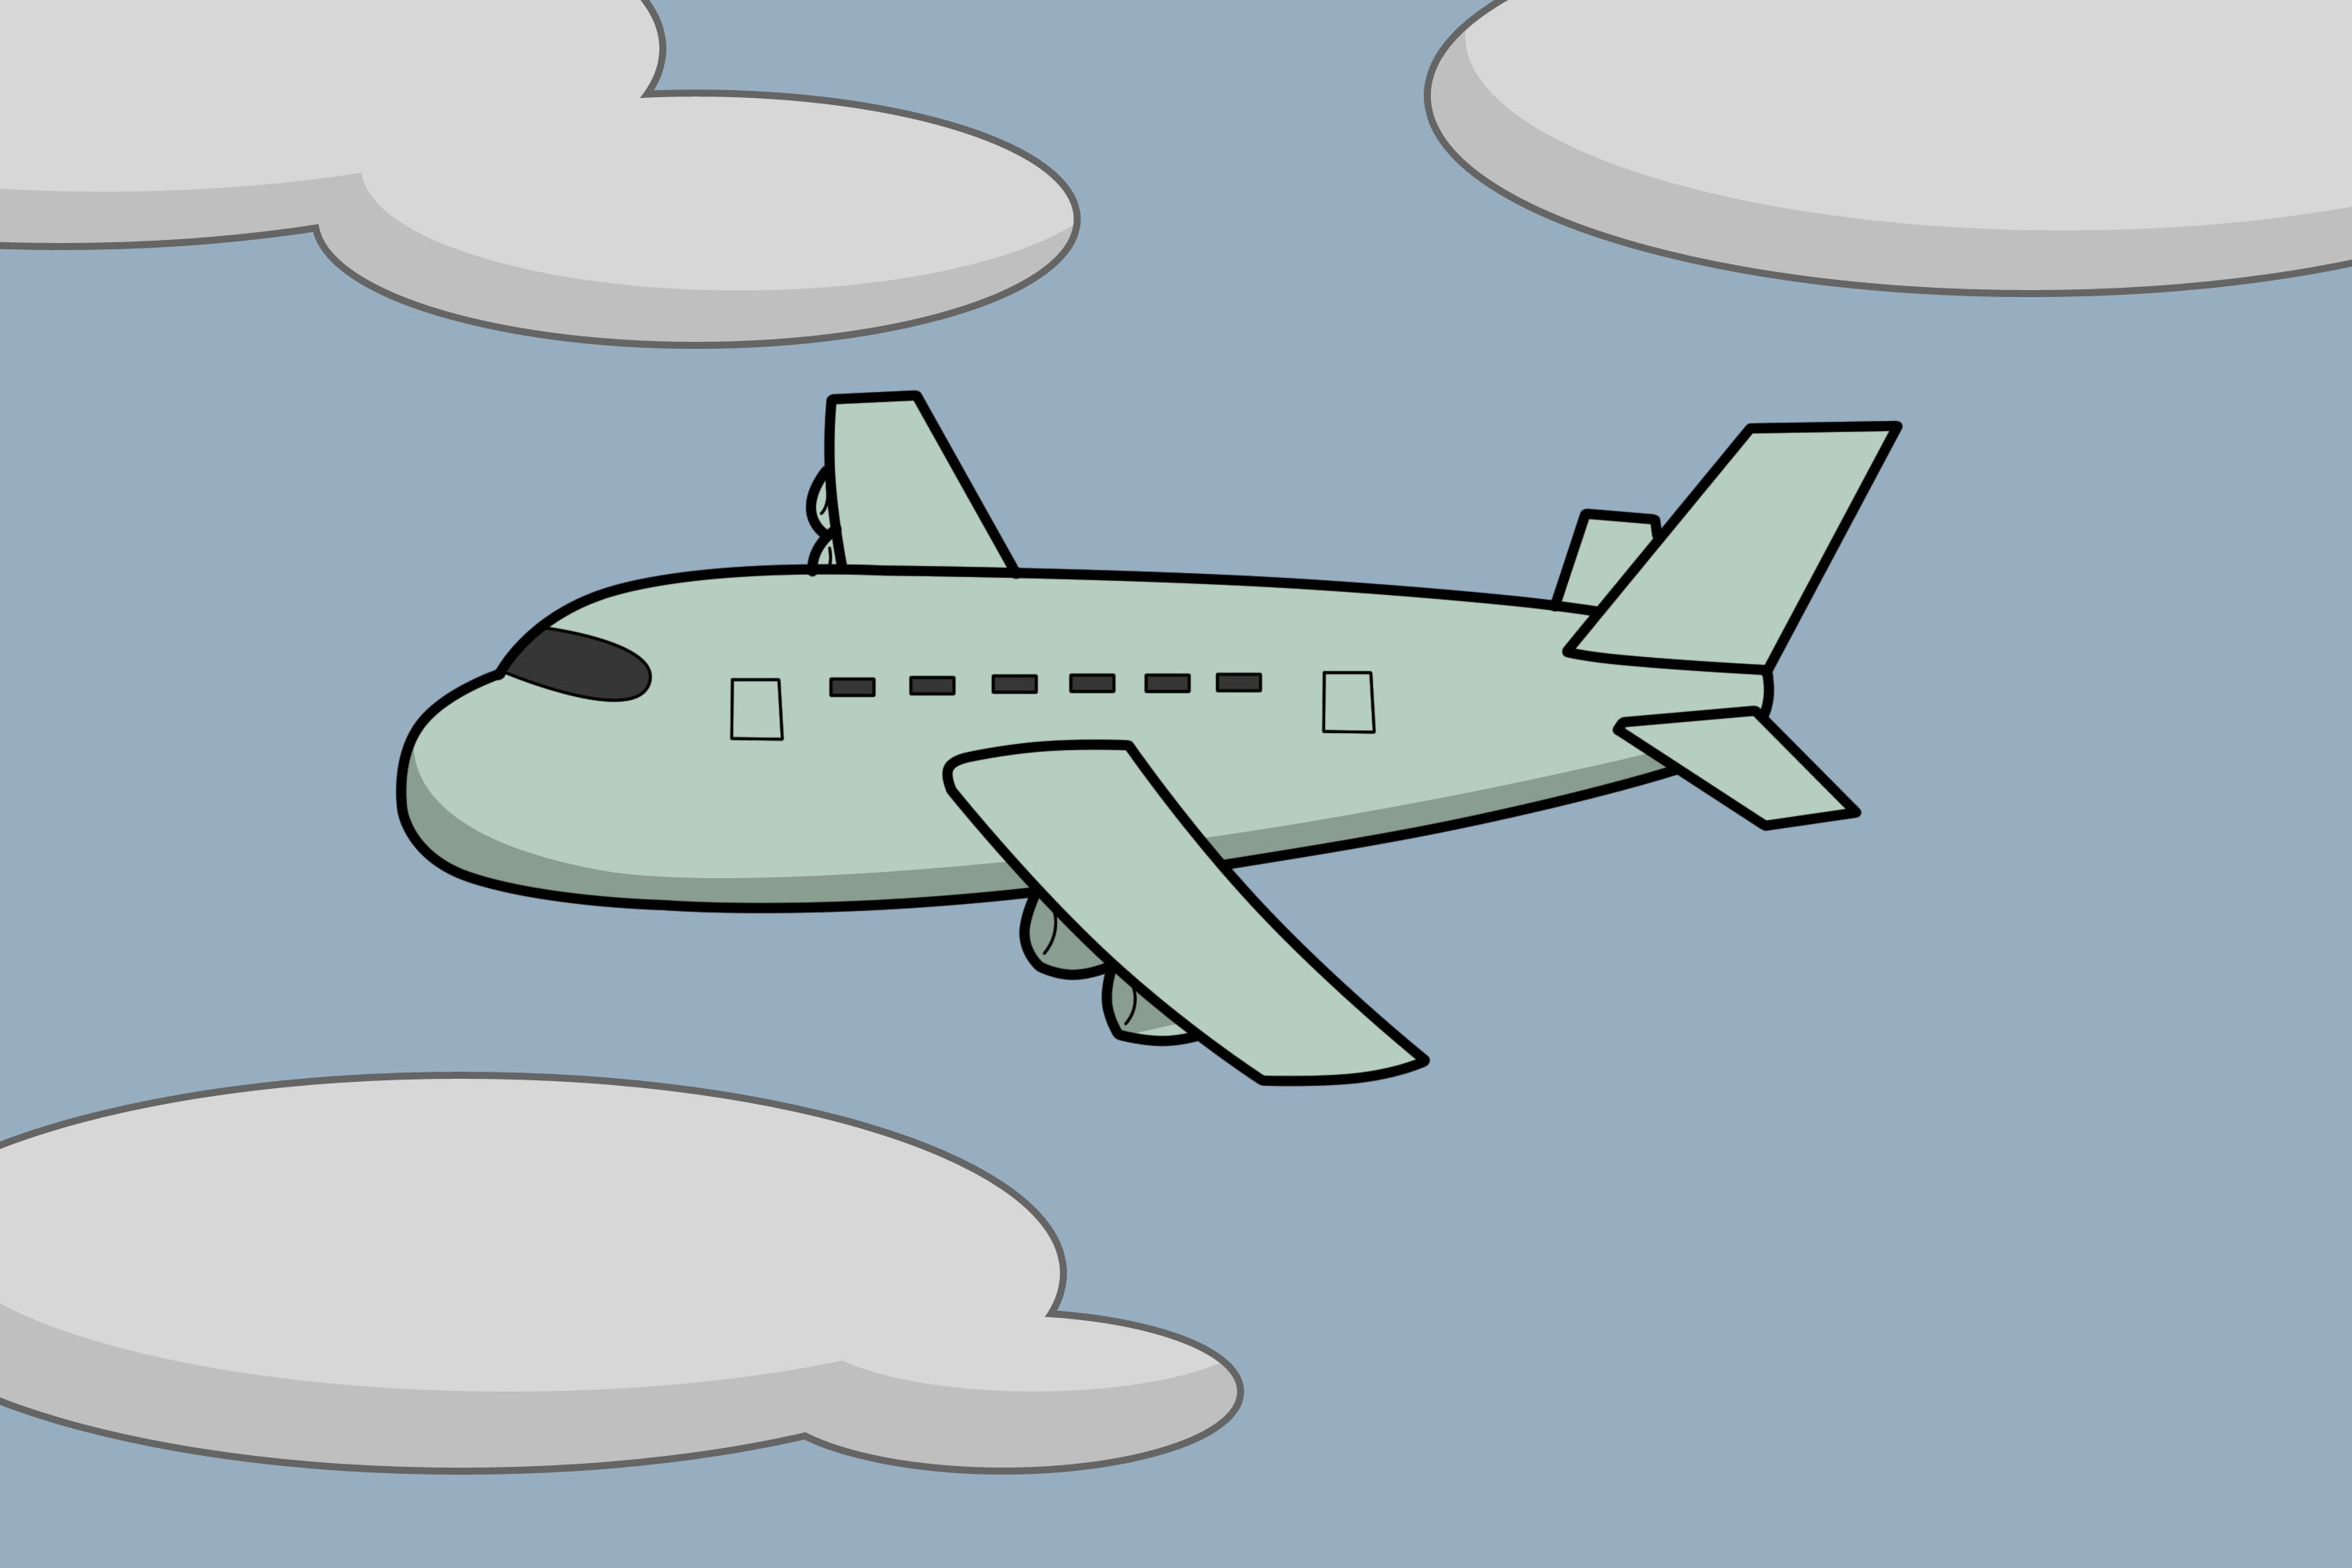 How do you draw an airplane?